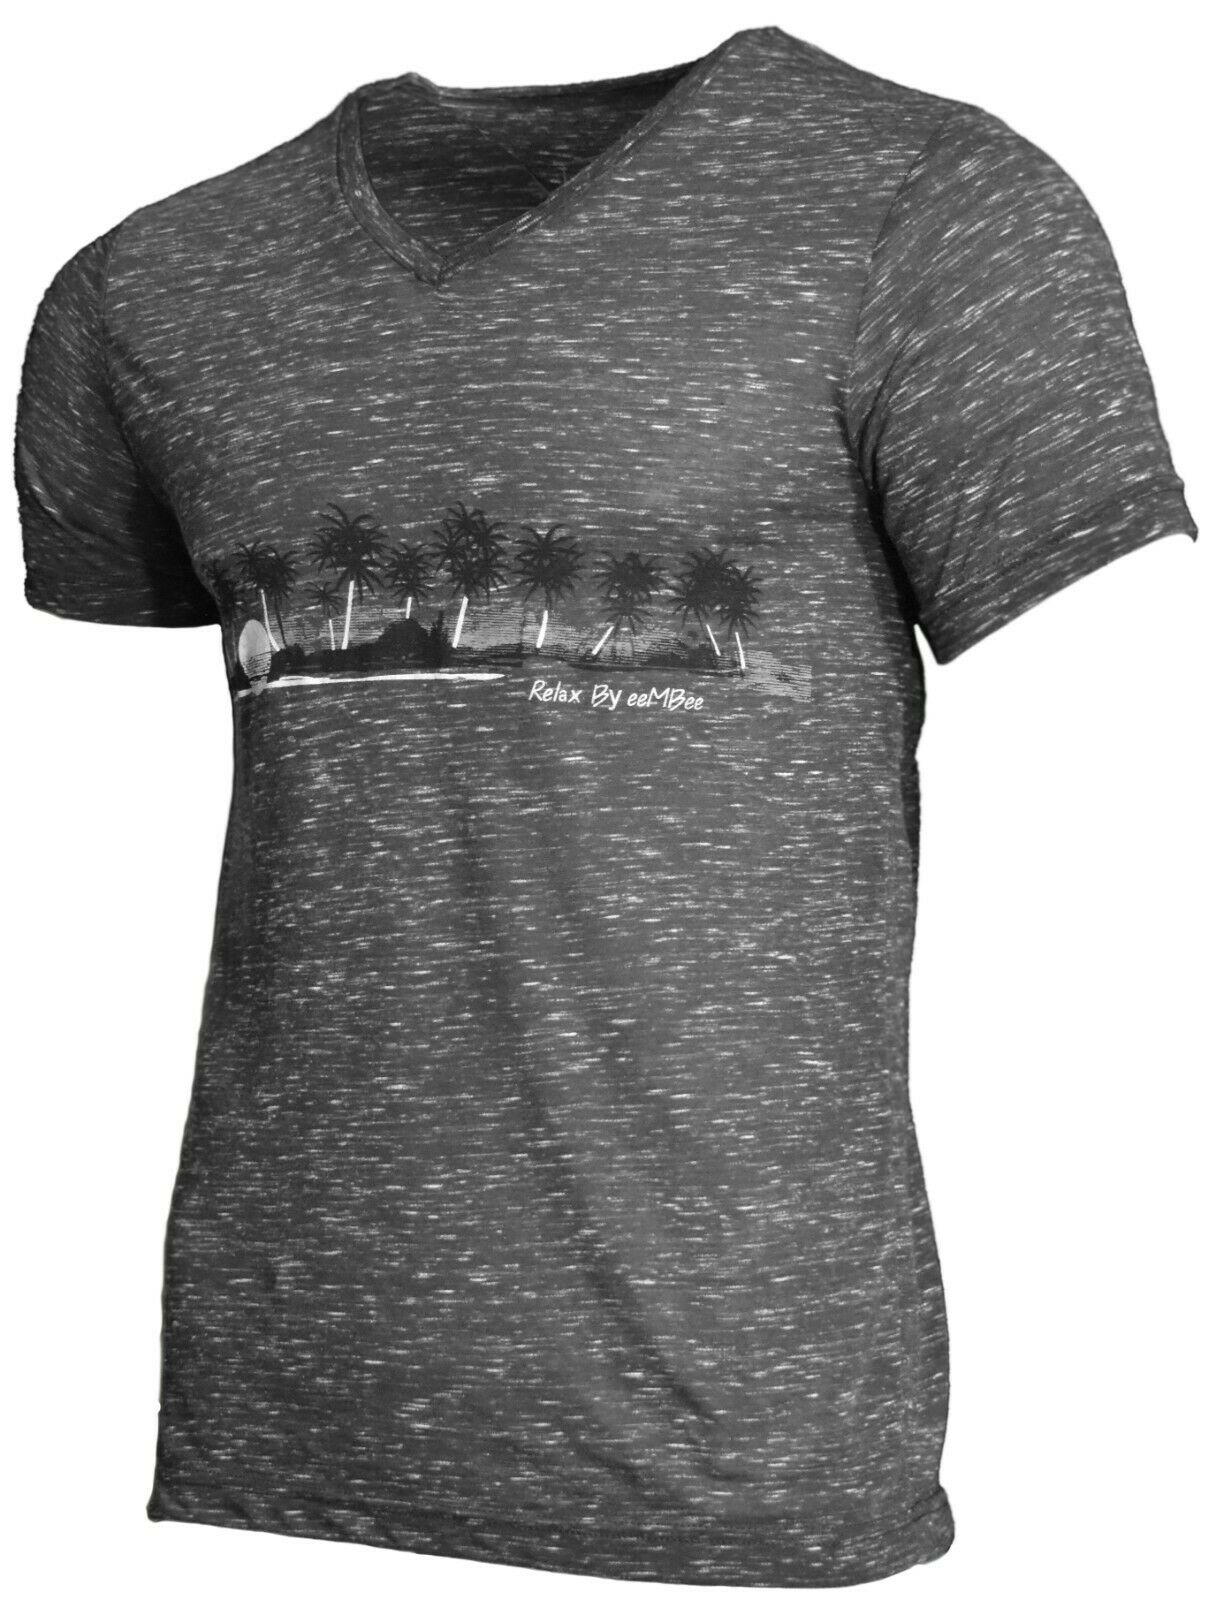 Men's T-Shirt V-Neck Sunset Palm Trees Relax By eeMBee